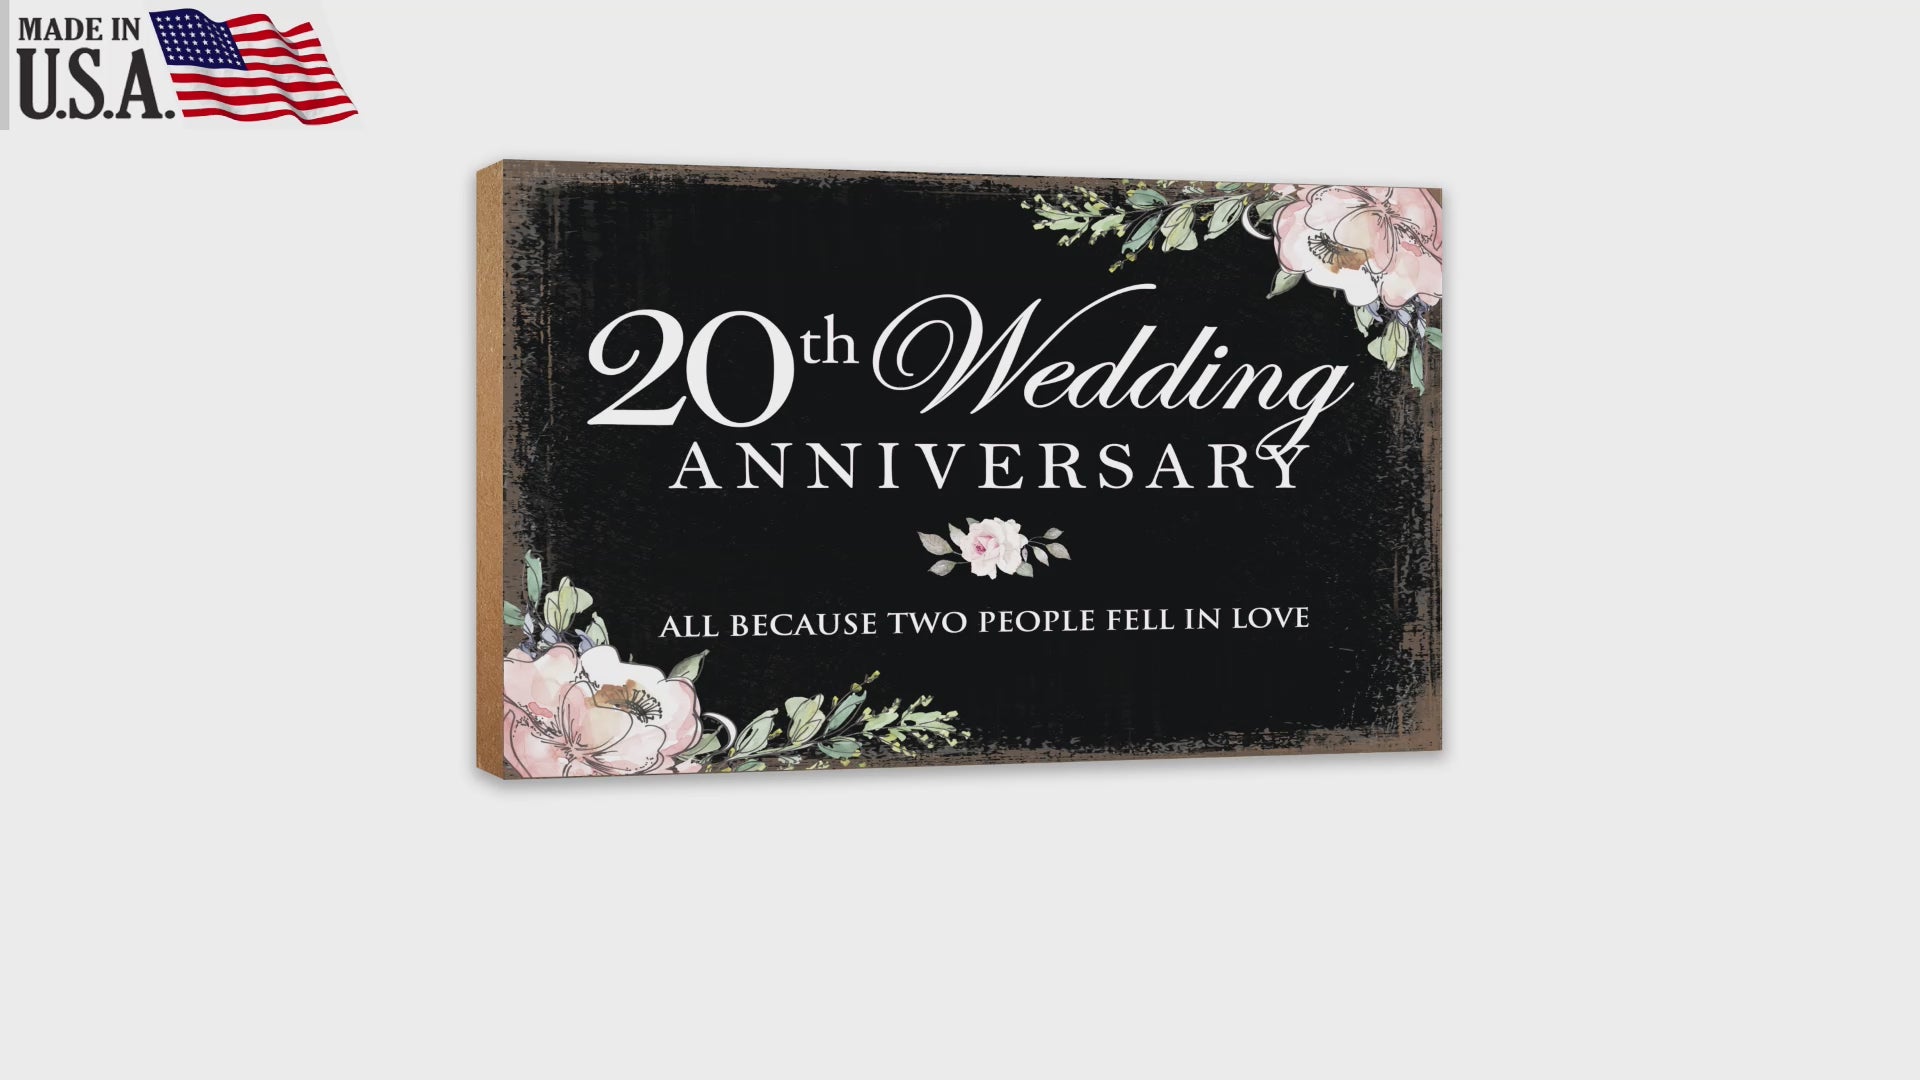 20th Wedding Anniversary Unique Shelf Decor and Tabletop Signs Gifts for Couples - Fell In Love